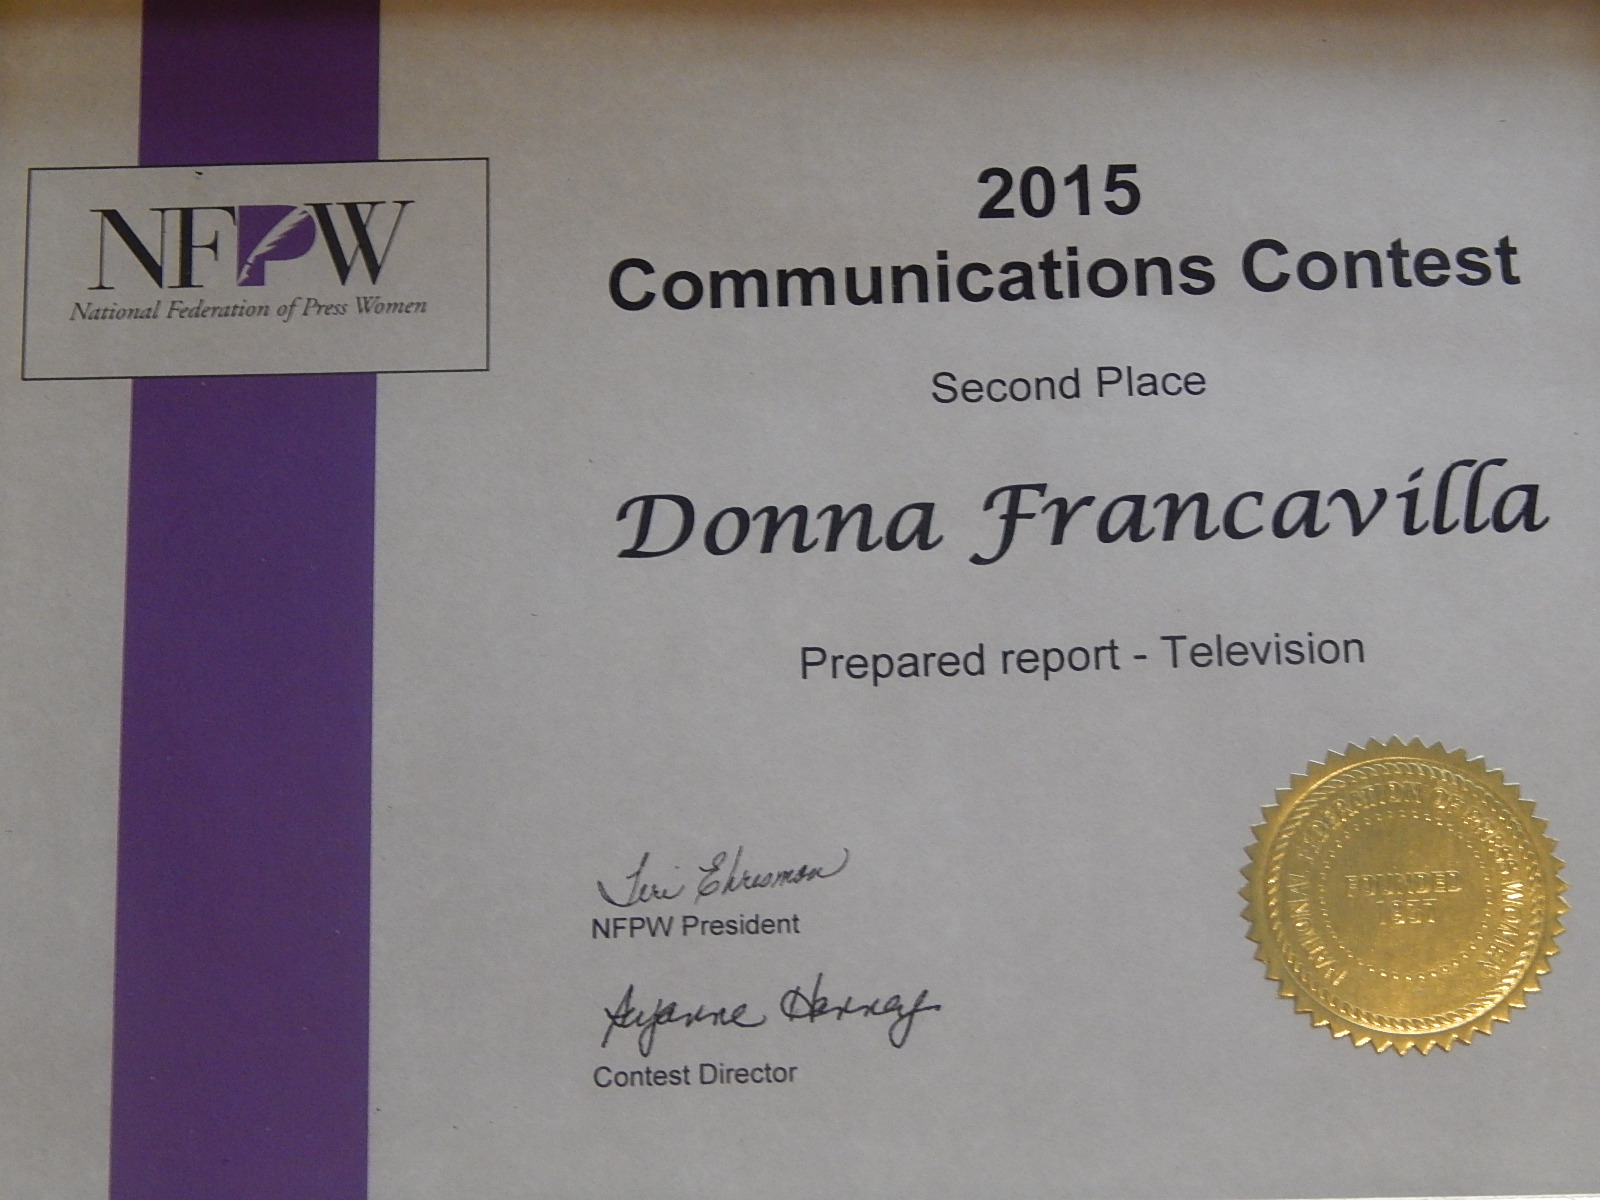 2015 National Federation of Press Women Communications Award – National Award – Second Place presented to Donna Francavilla for Prepared Report – Television